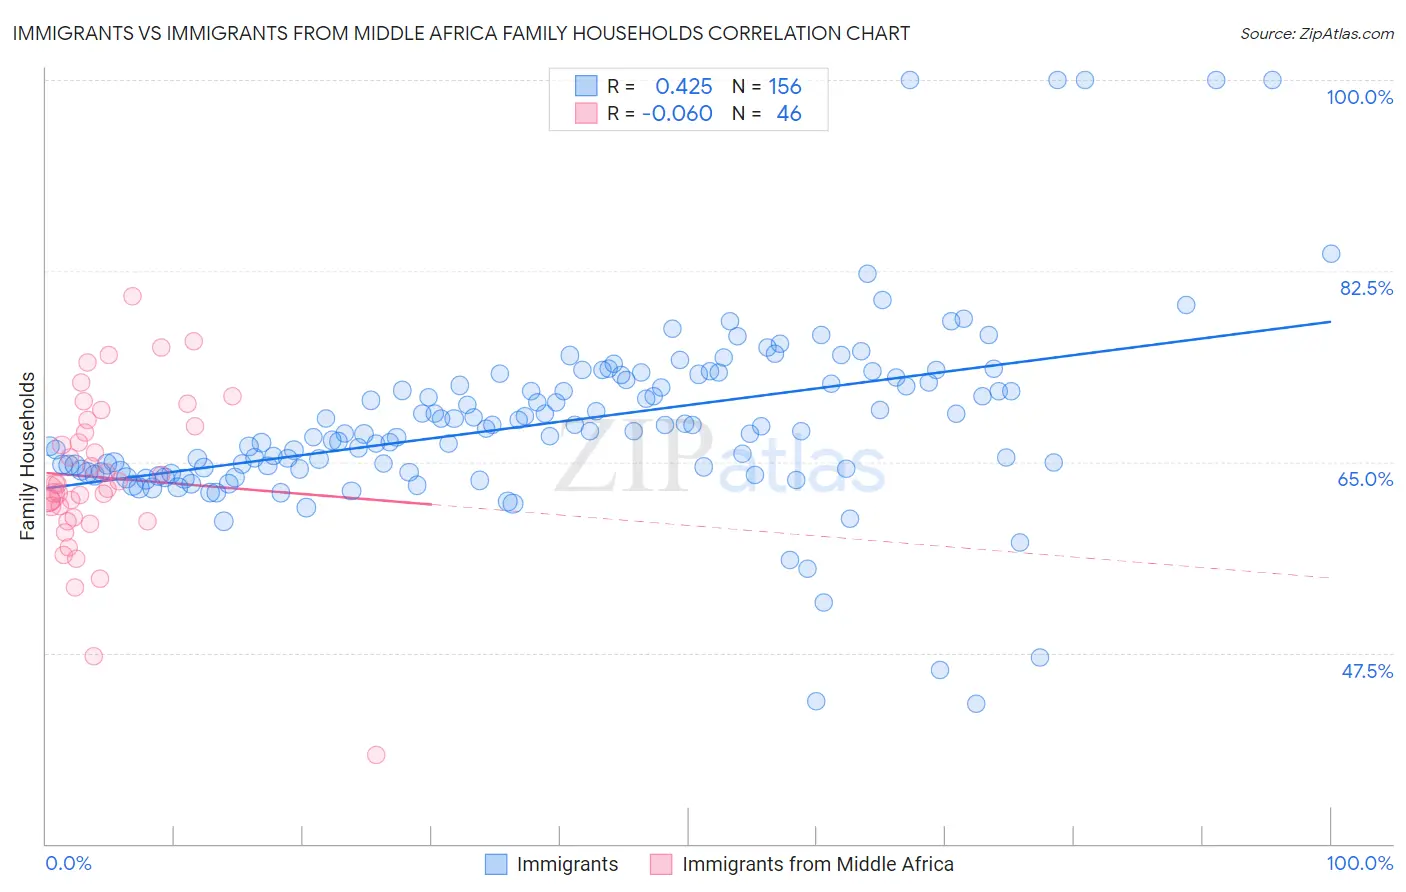 Immigrants vs Immigrants from Middle Africa Family Households